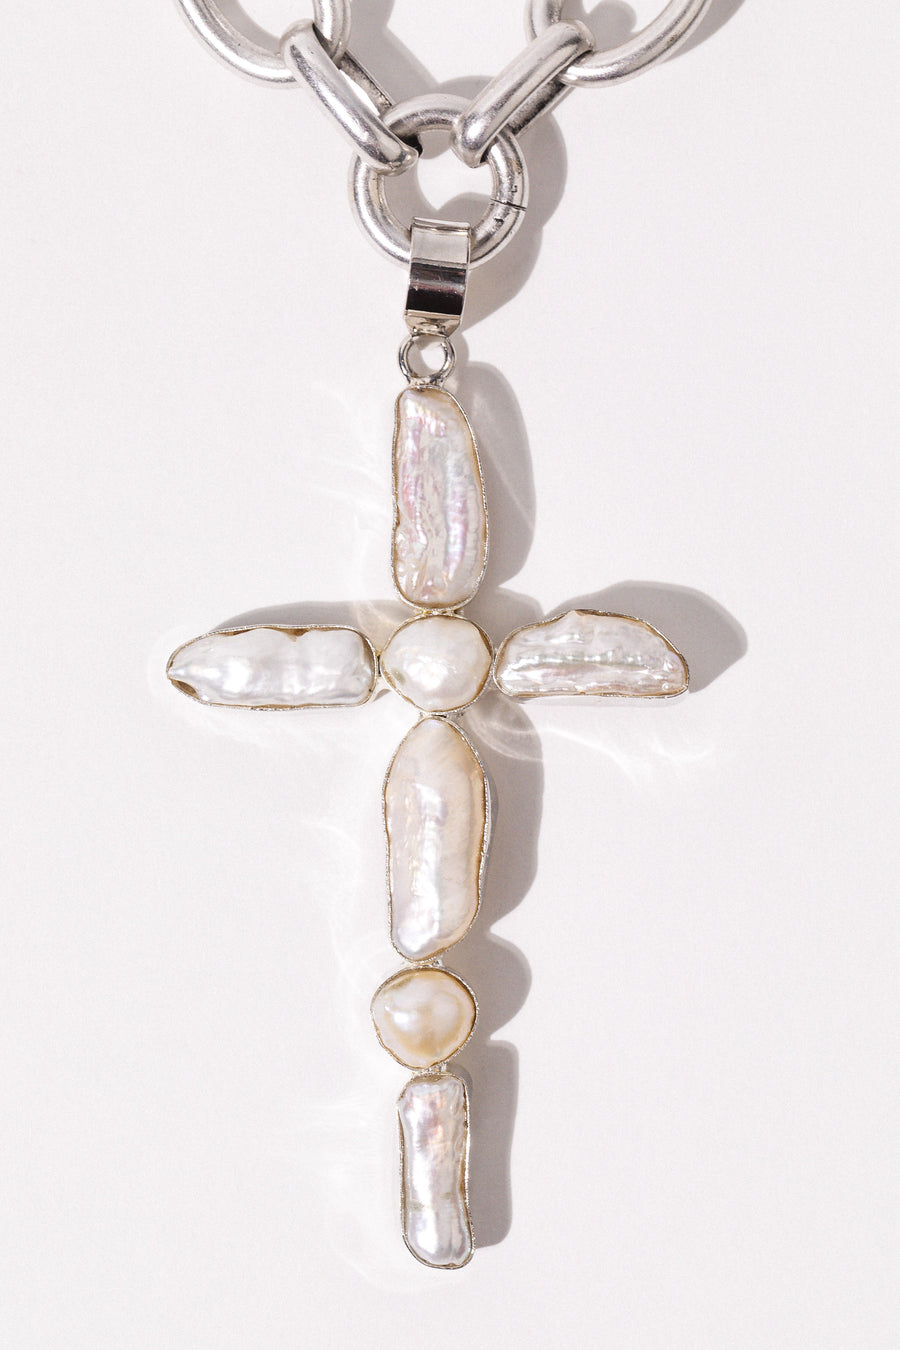 Goddess Jewelry Silver / 15 Inches / 7 Pearl Cordelia Pearl Cross Necklace